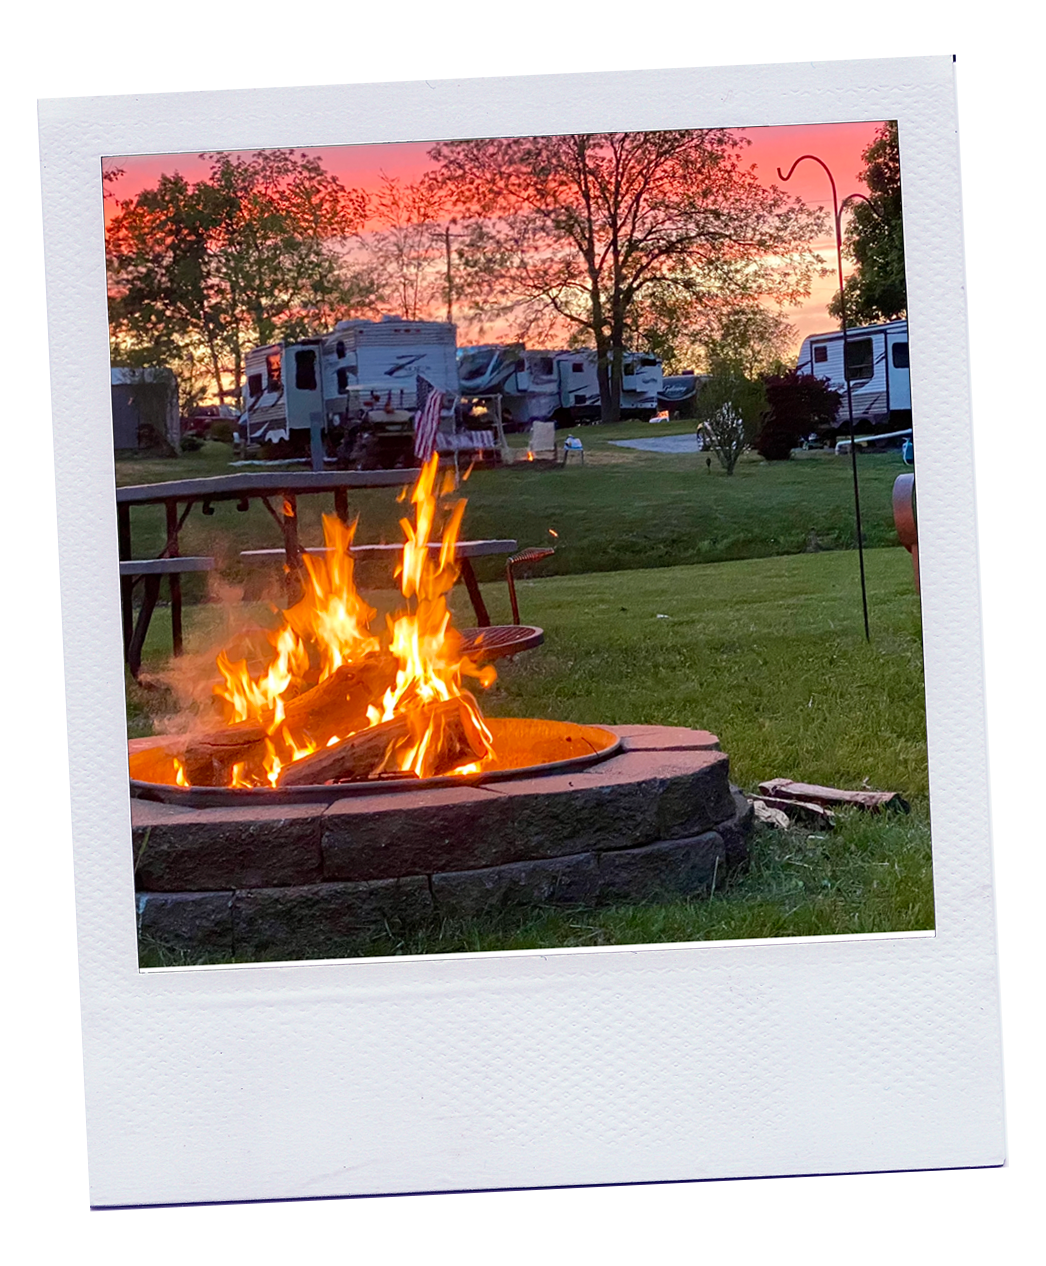 poleriod picture of a campfire with campers and a sunset in the background